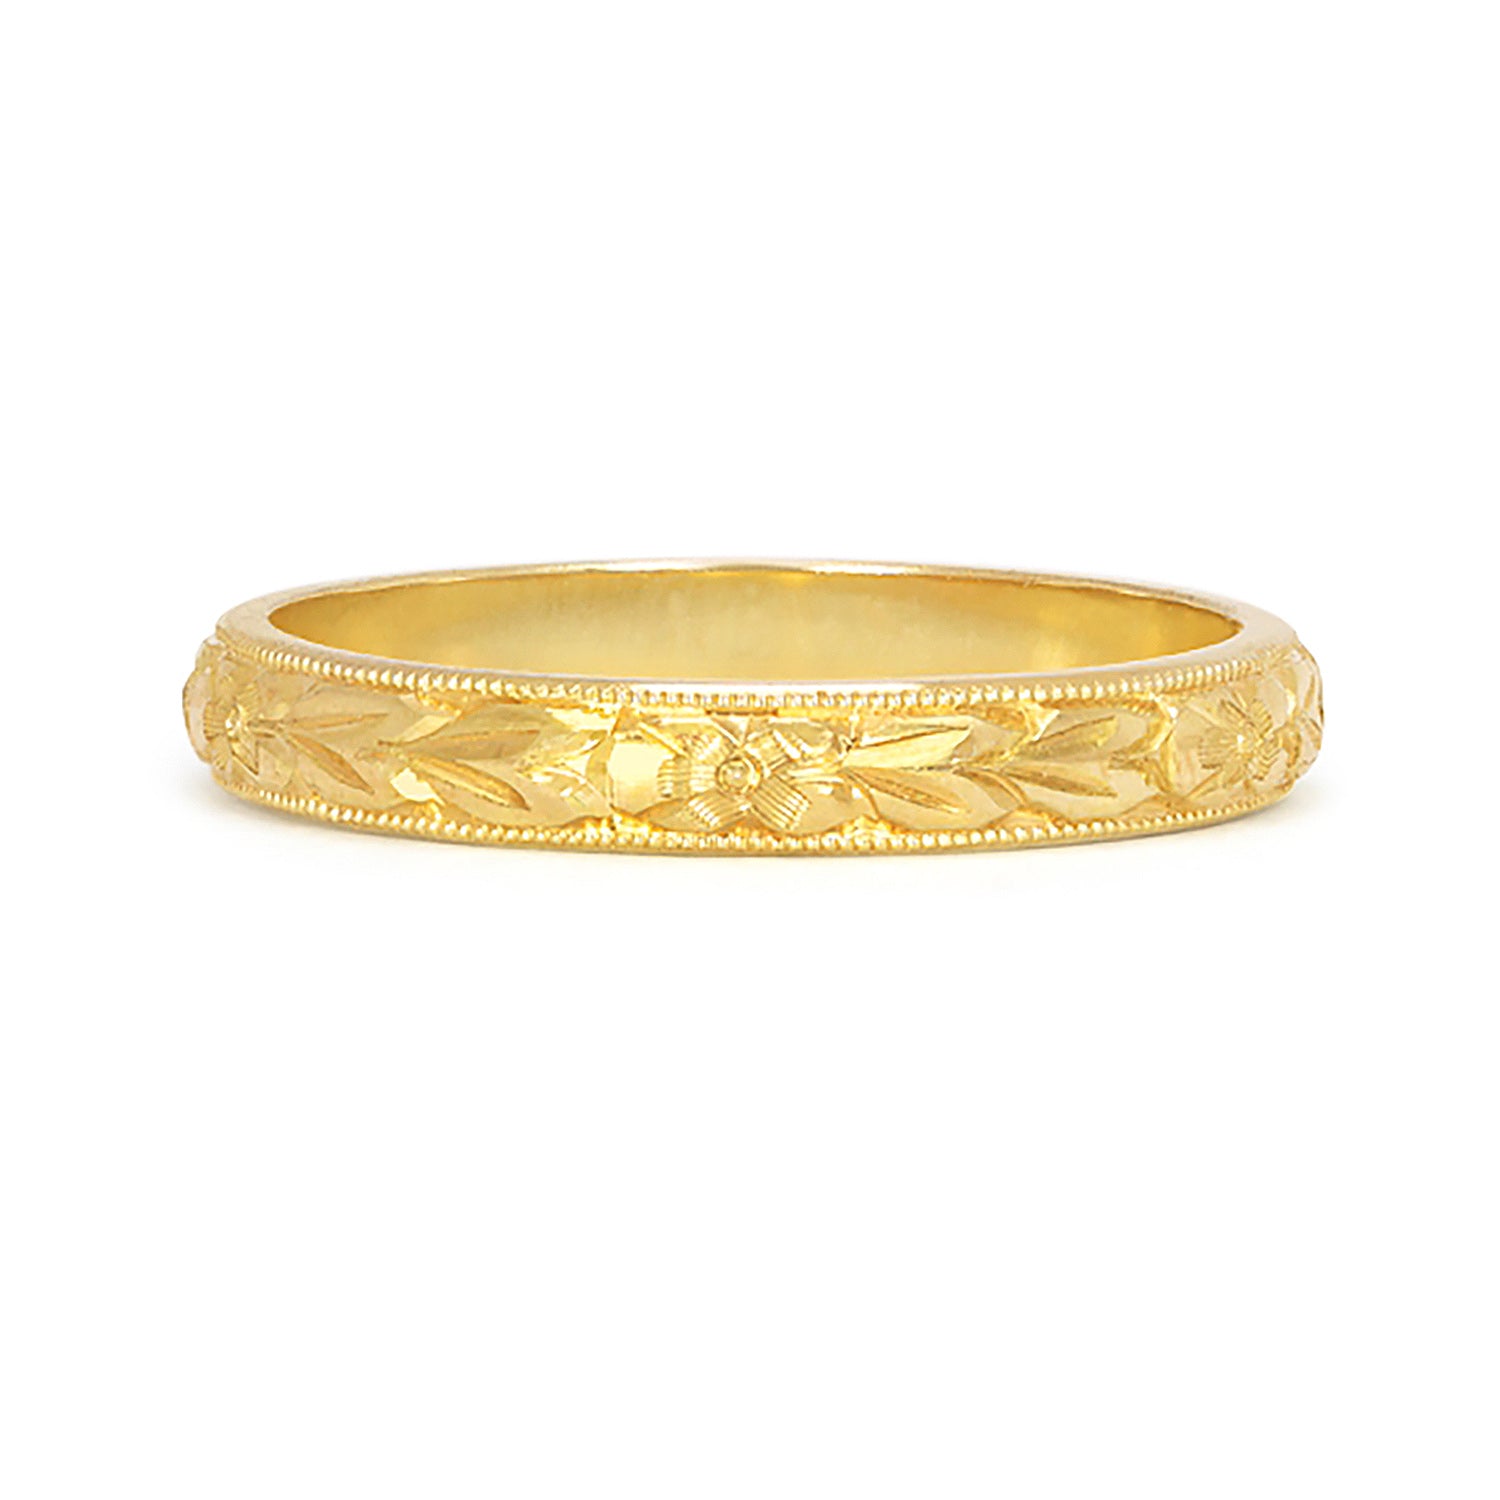 A D-shaped 2mm wedding band in 18ct recycled yellow gold, carefully hand-engraved with a repetitive orange blossom motif and a border of milgrain beading